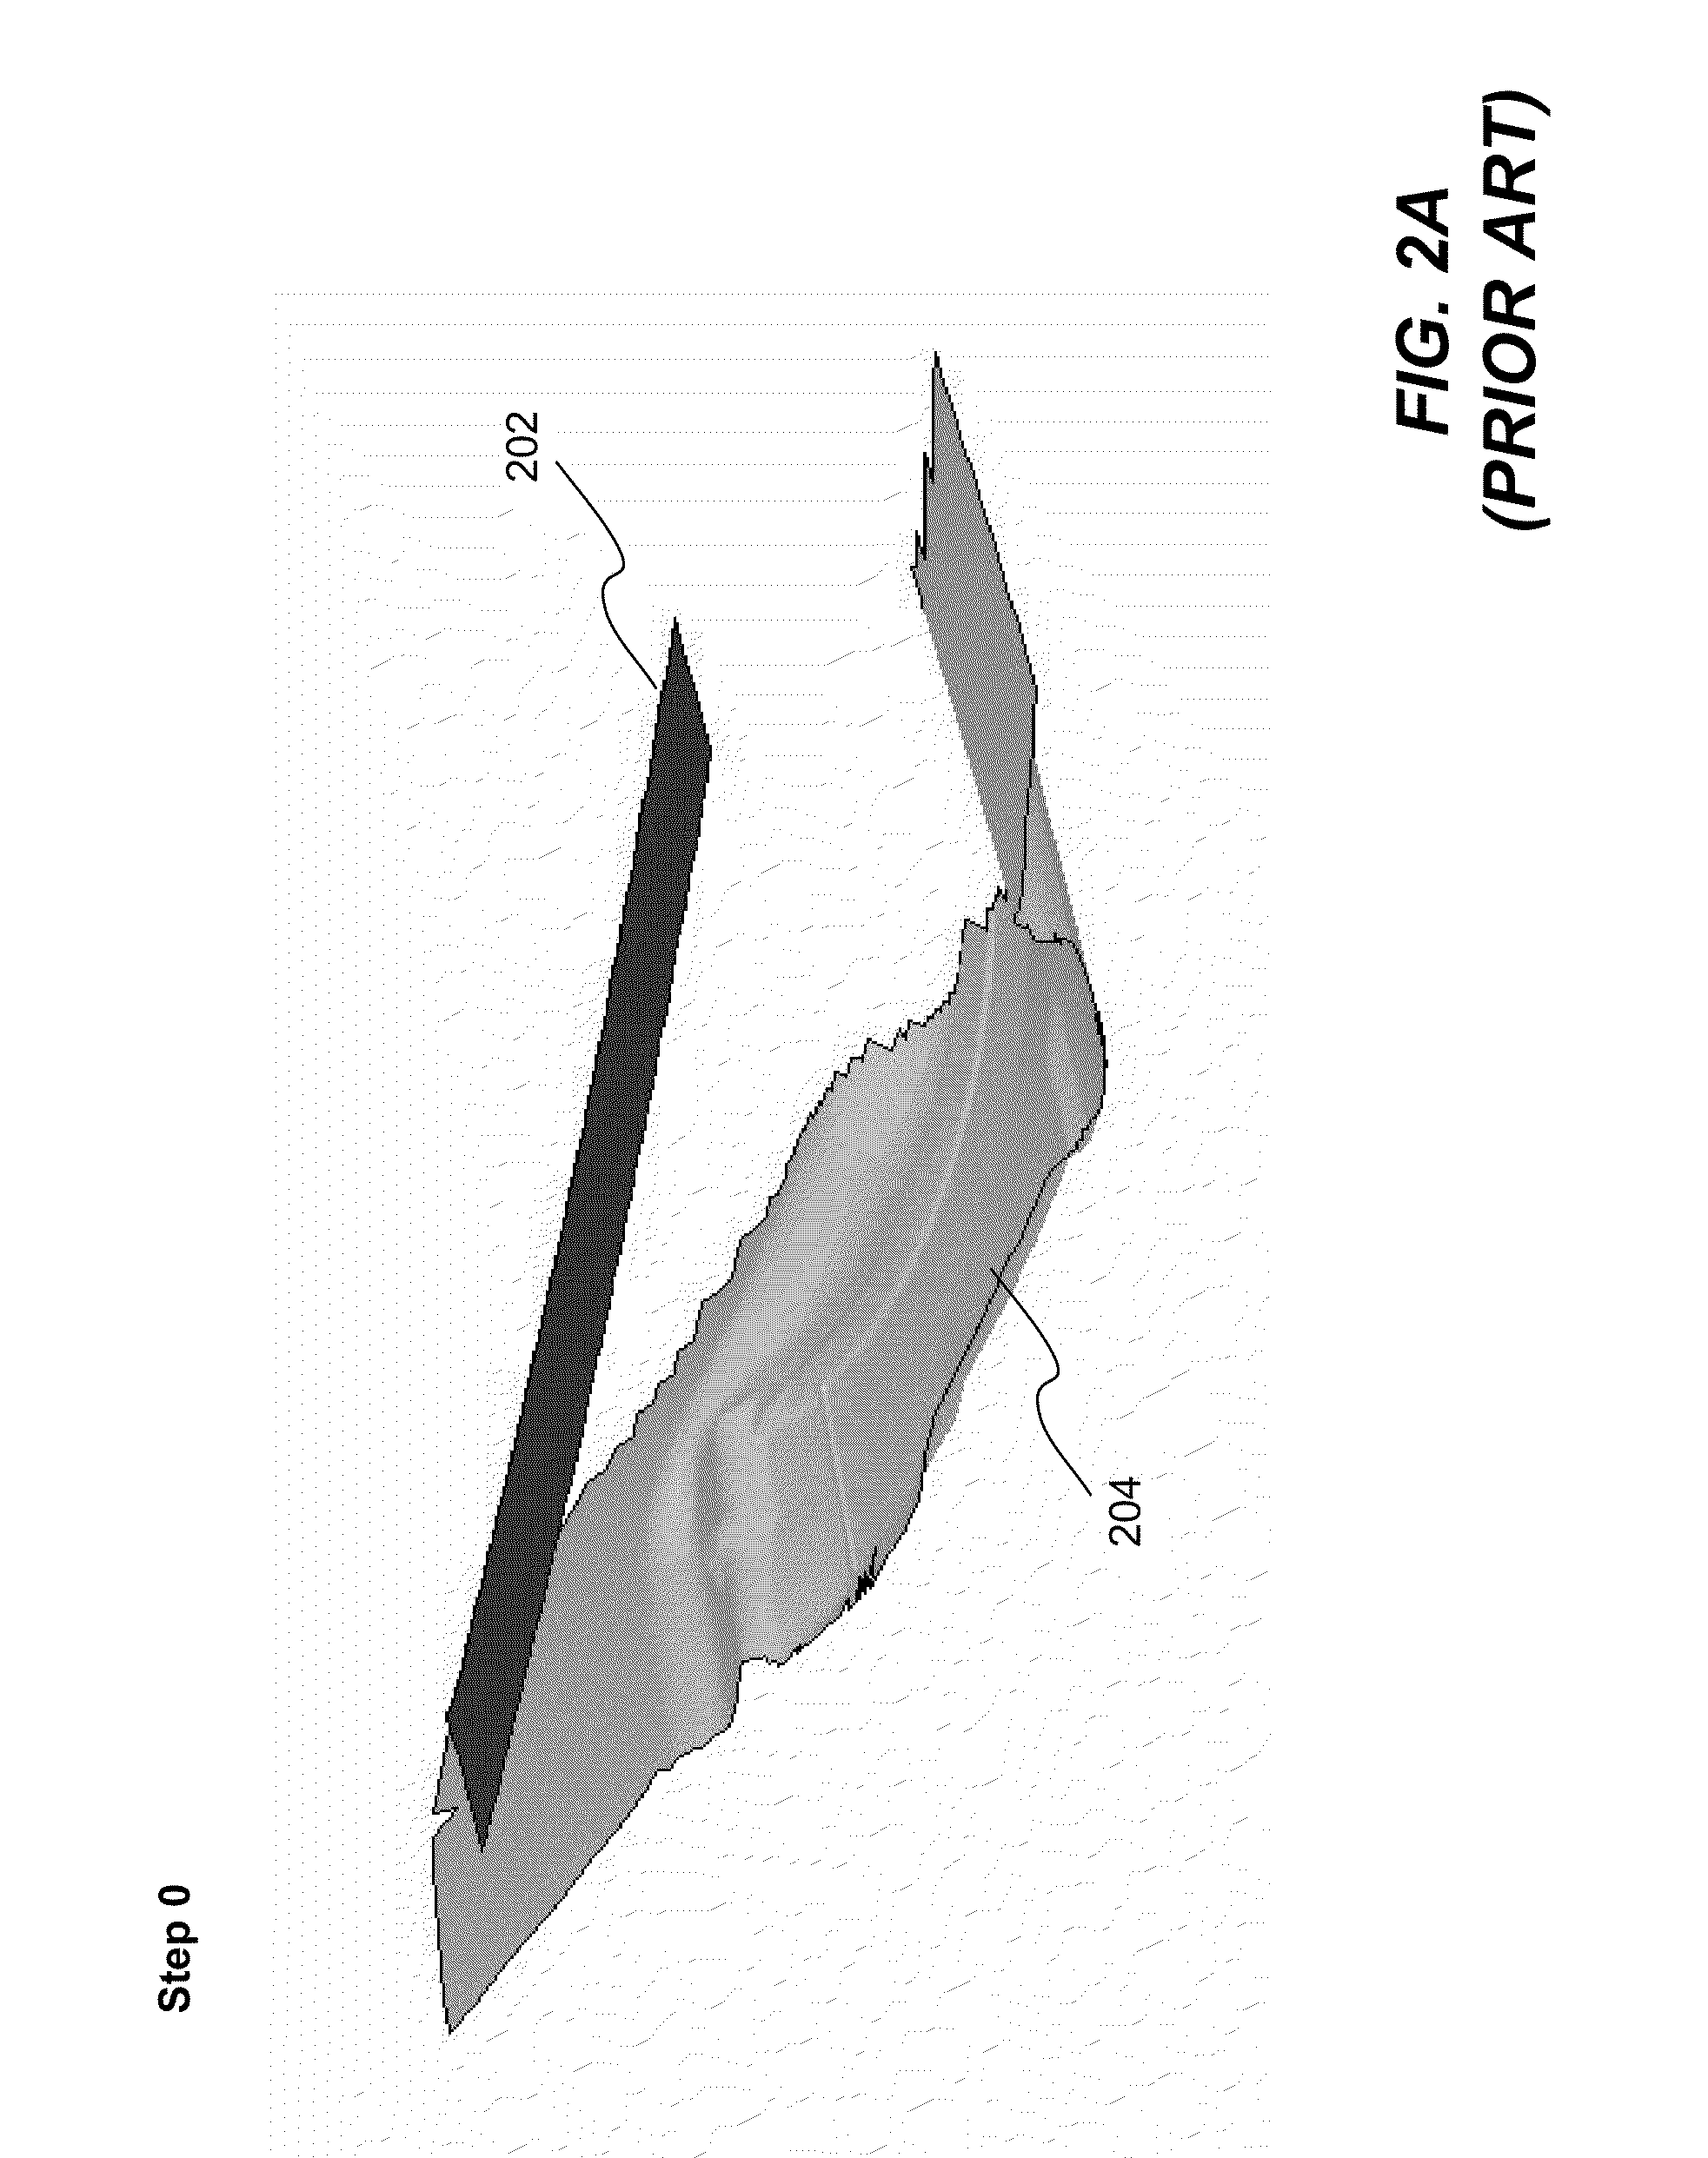 Systems and methods of limiting contact penetration in numerical simulation of non-linear structure response